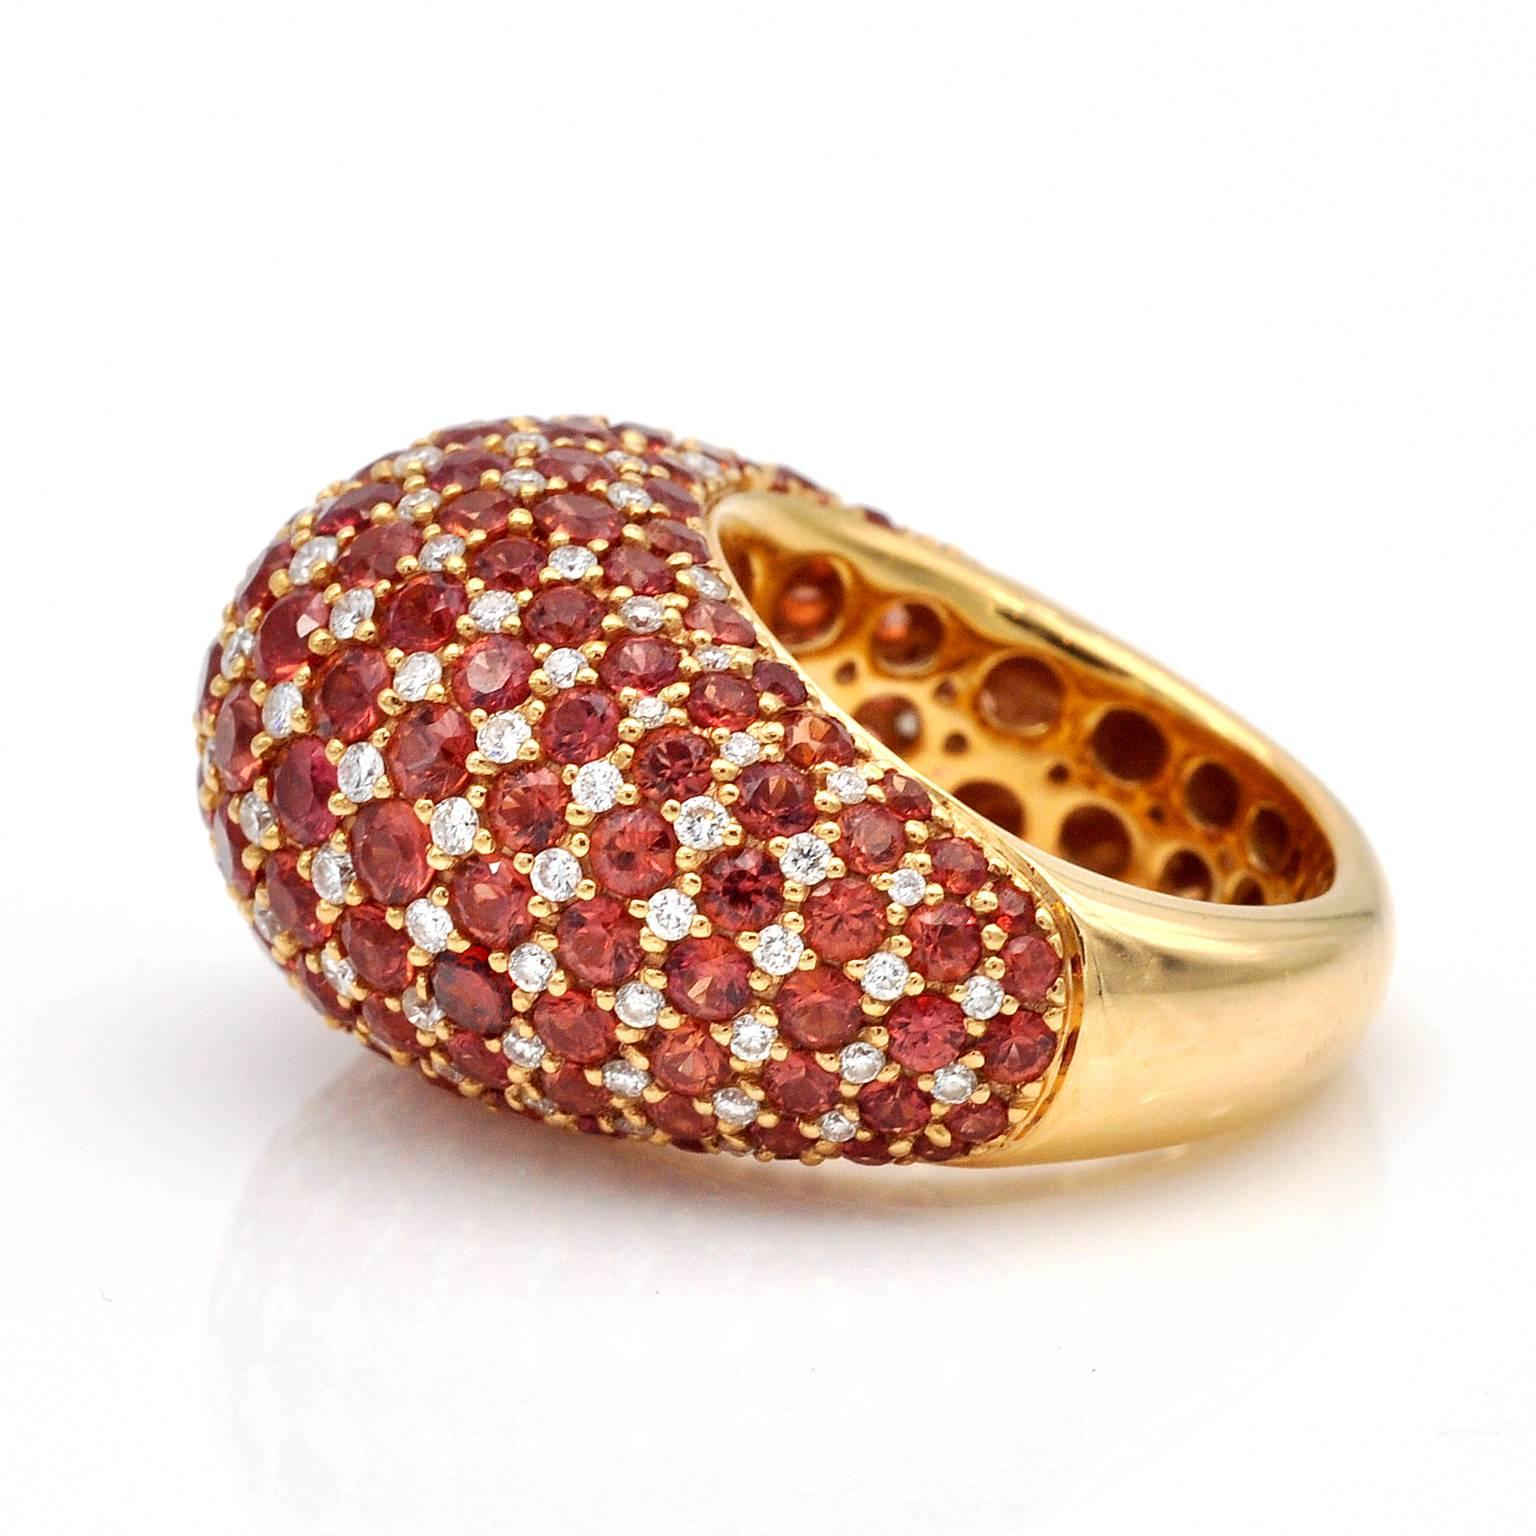 Brilliant cut Pinkish Orange sapphires and diamonds set on a perfectly shaped dome ring.

Sapphires: 8.52 cts , Diamonds : 1.19 cts
weight : 16.35 Grams

Ring Size: 6½ (US), 53 (European). Resizing is possible.

